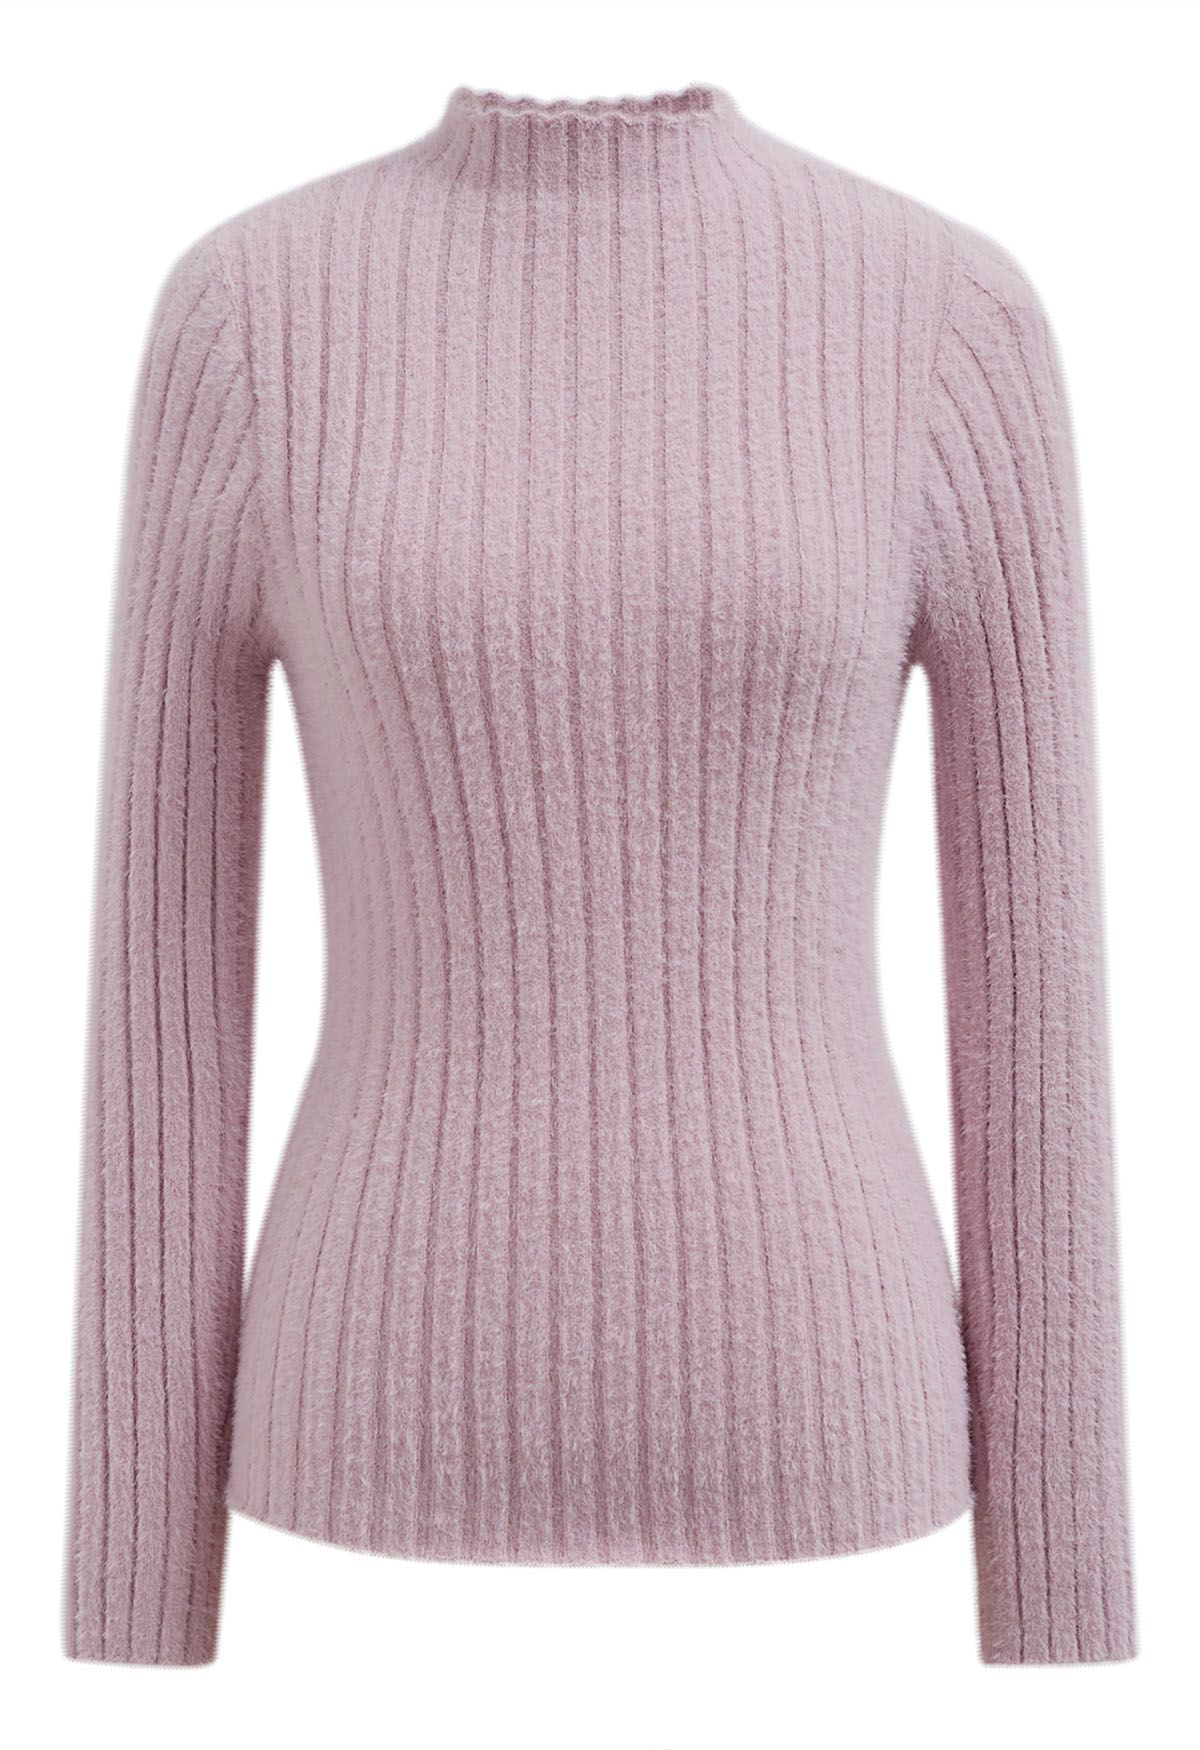 Mock Neck Fuzzy Rib Knit Top in Pink | Chicwish